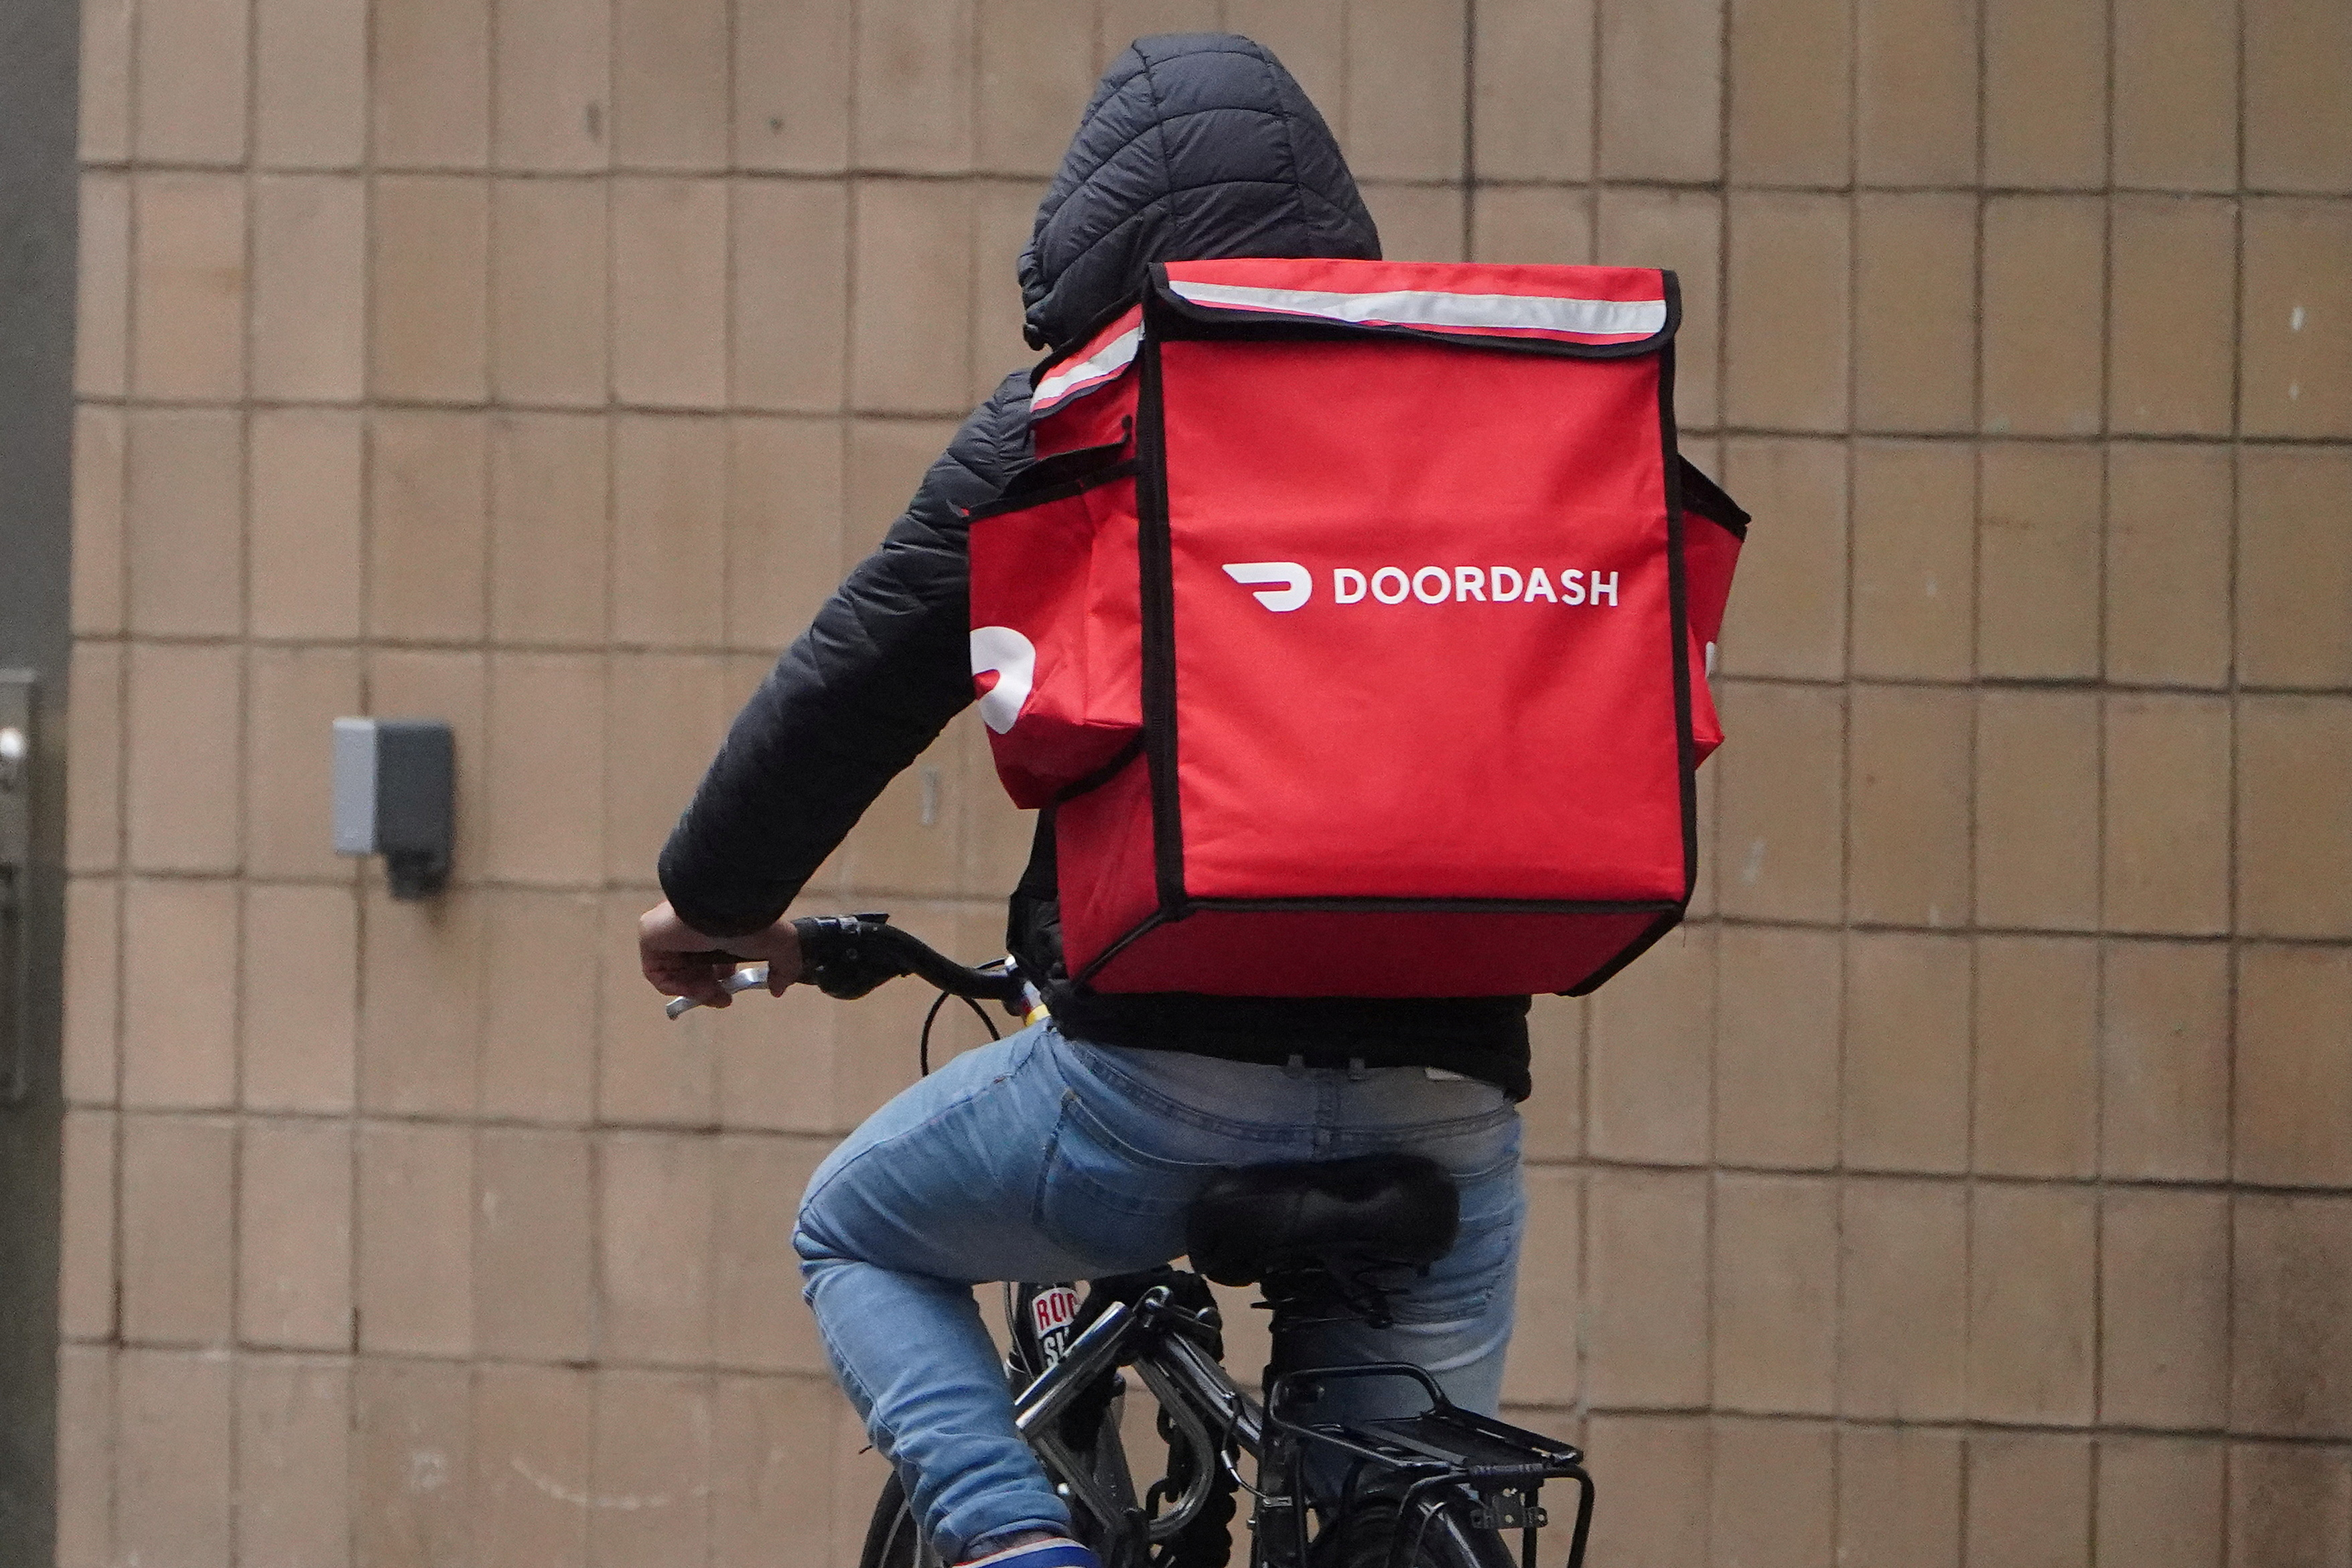 A delivery person for Doordash rides his bike in the rain during the coronavirus disease (COVID-19) pandemic in the Manhattan borough of New York City